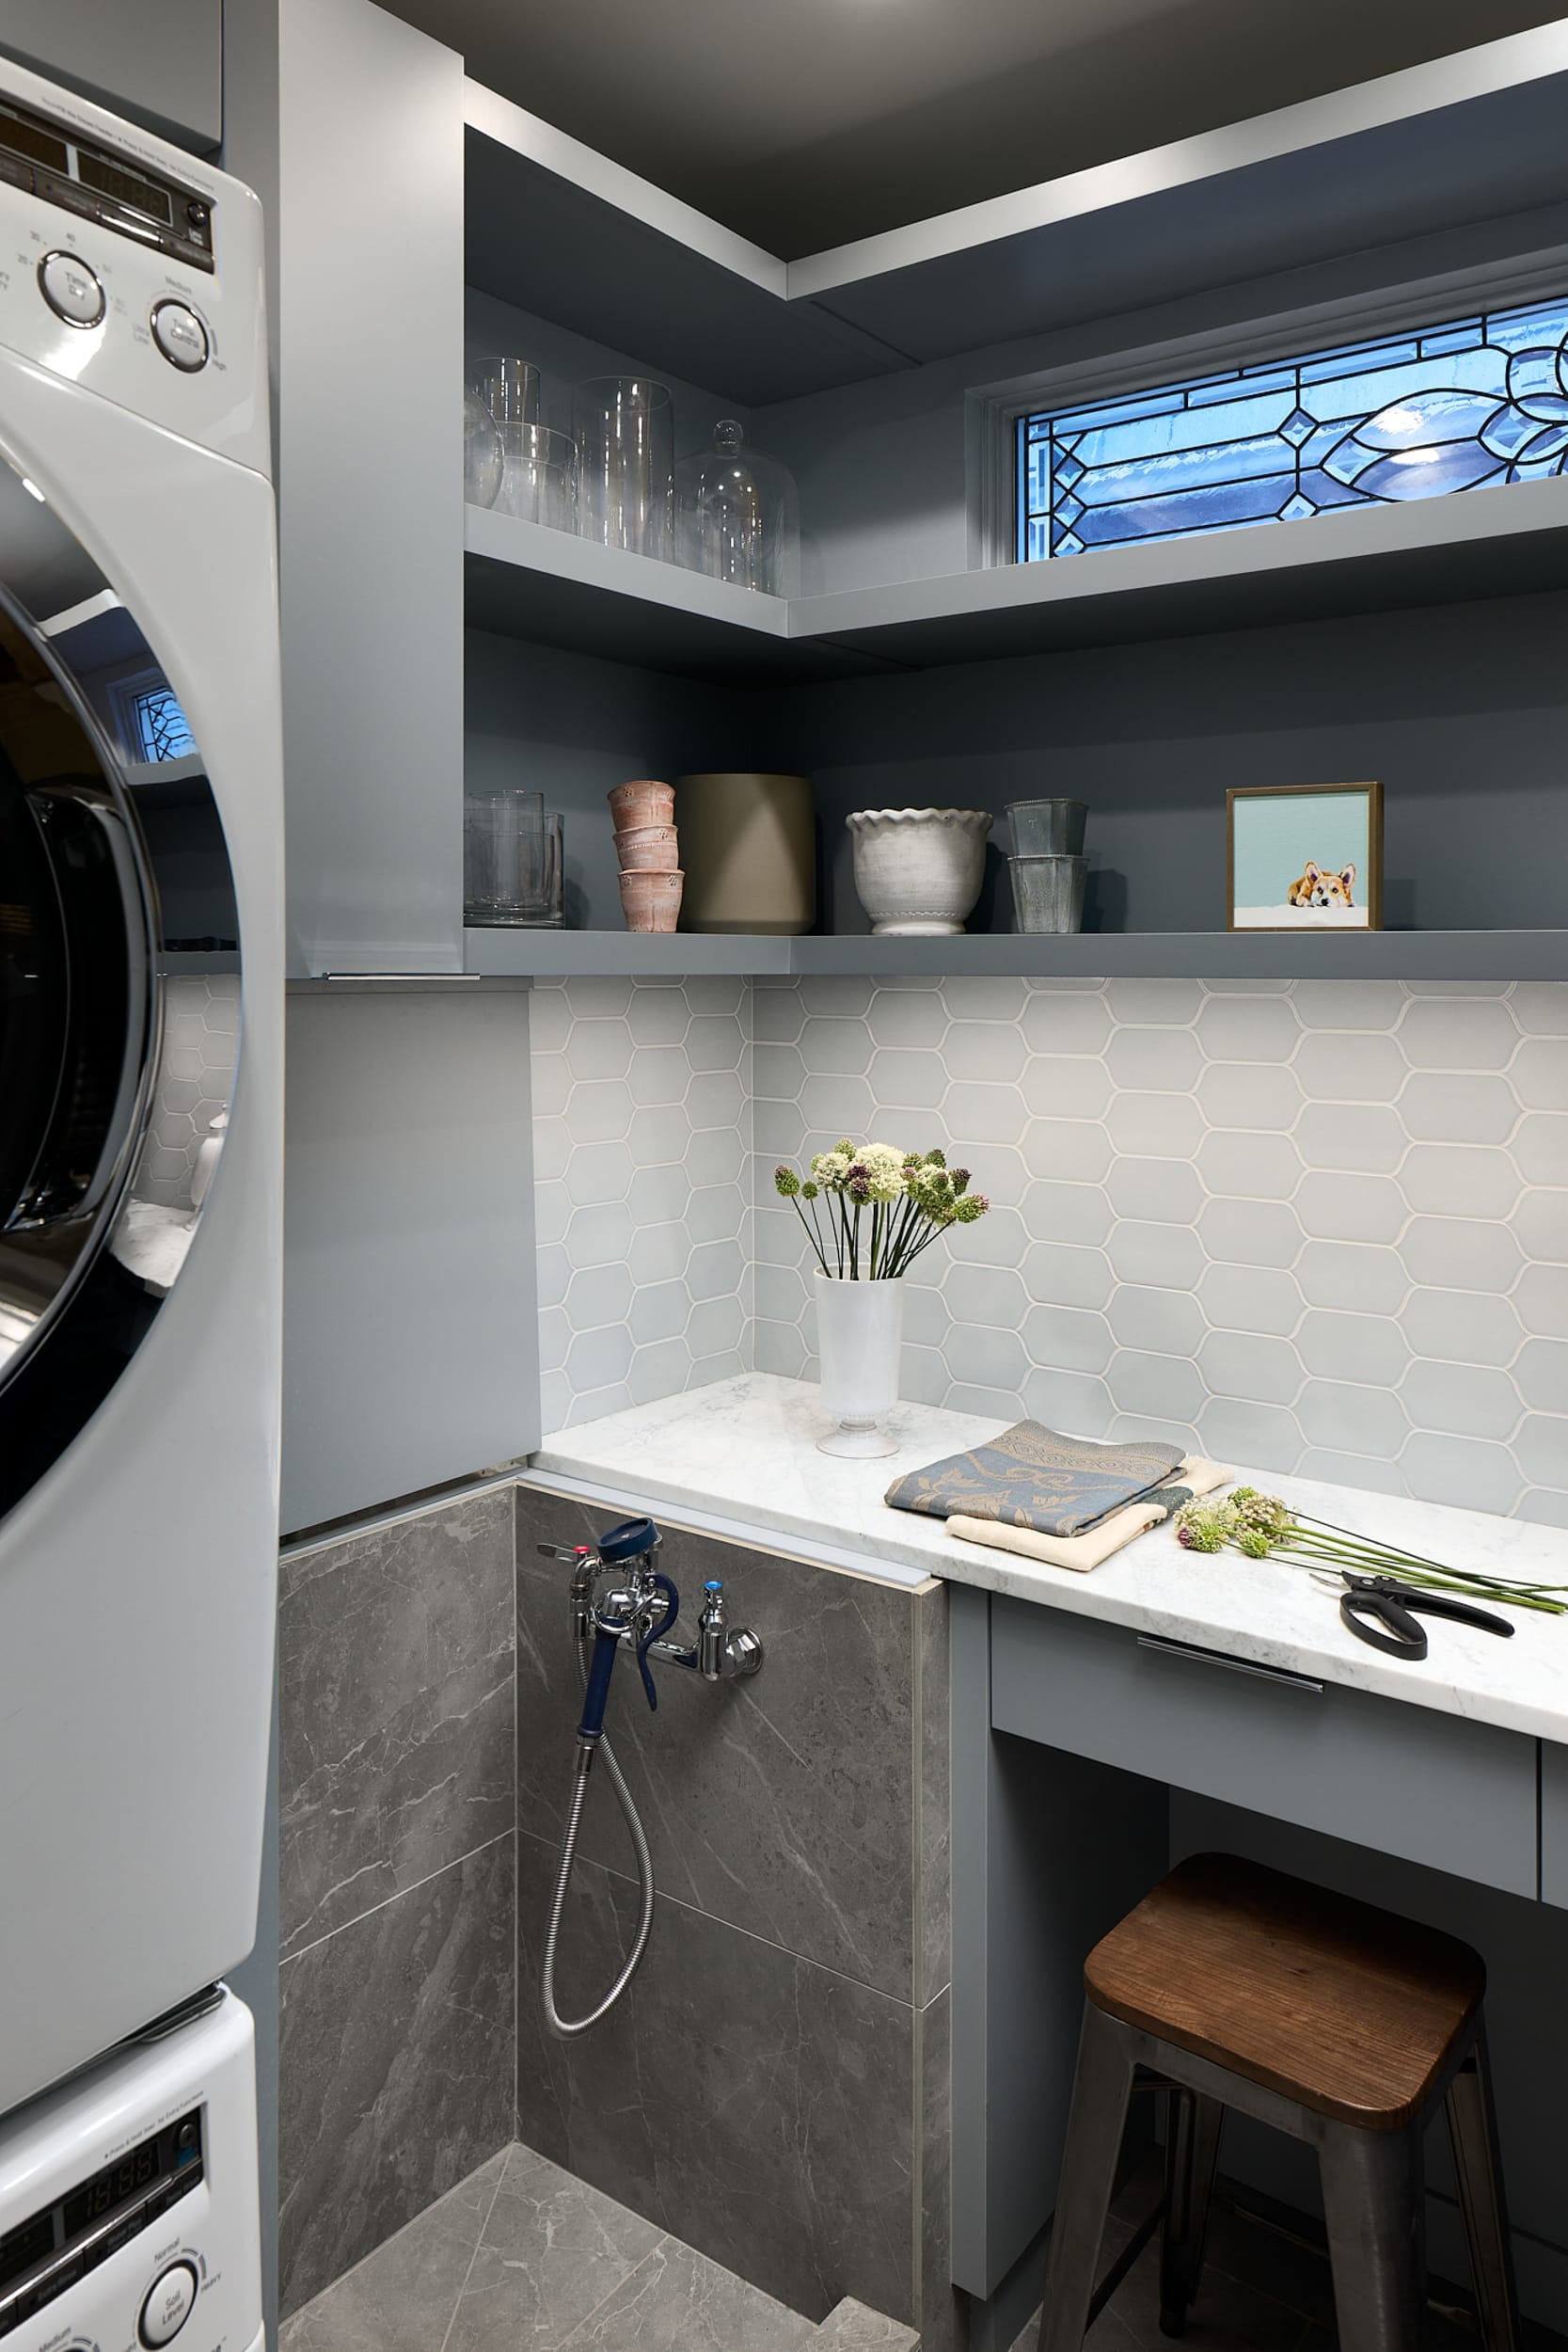 A modern home with a laundry room equipped with a washer and dryer, expertly designed by a skilled carpenter during the home building process.